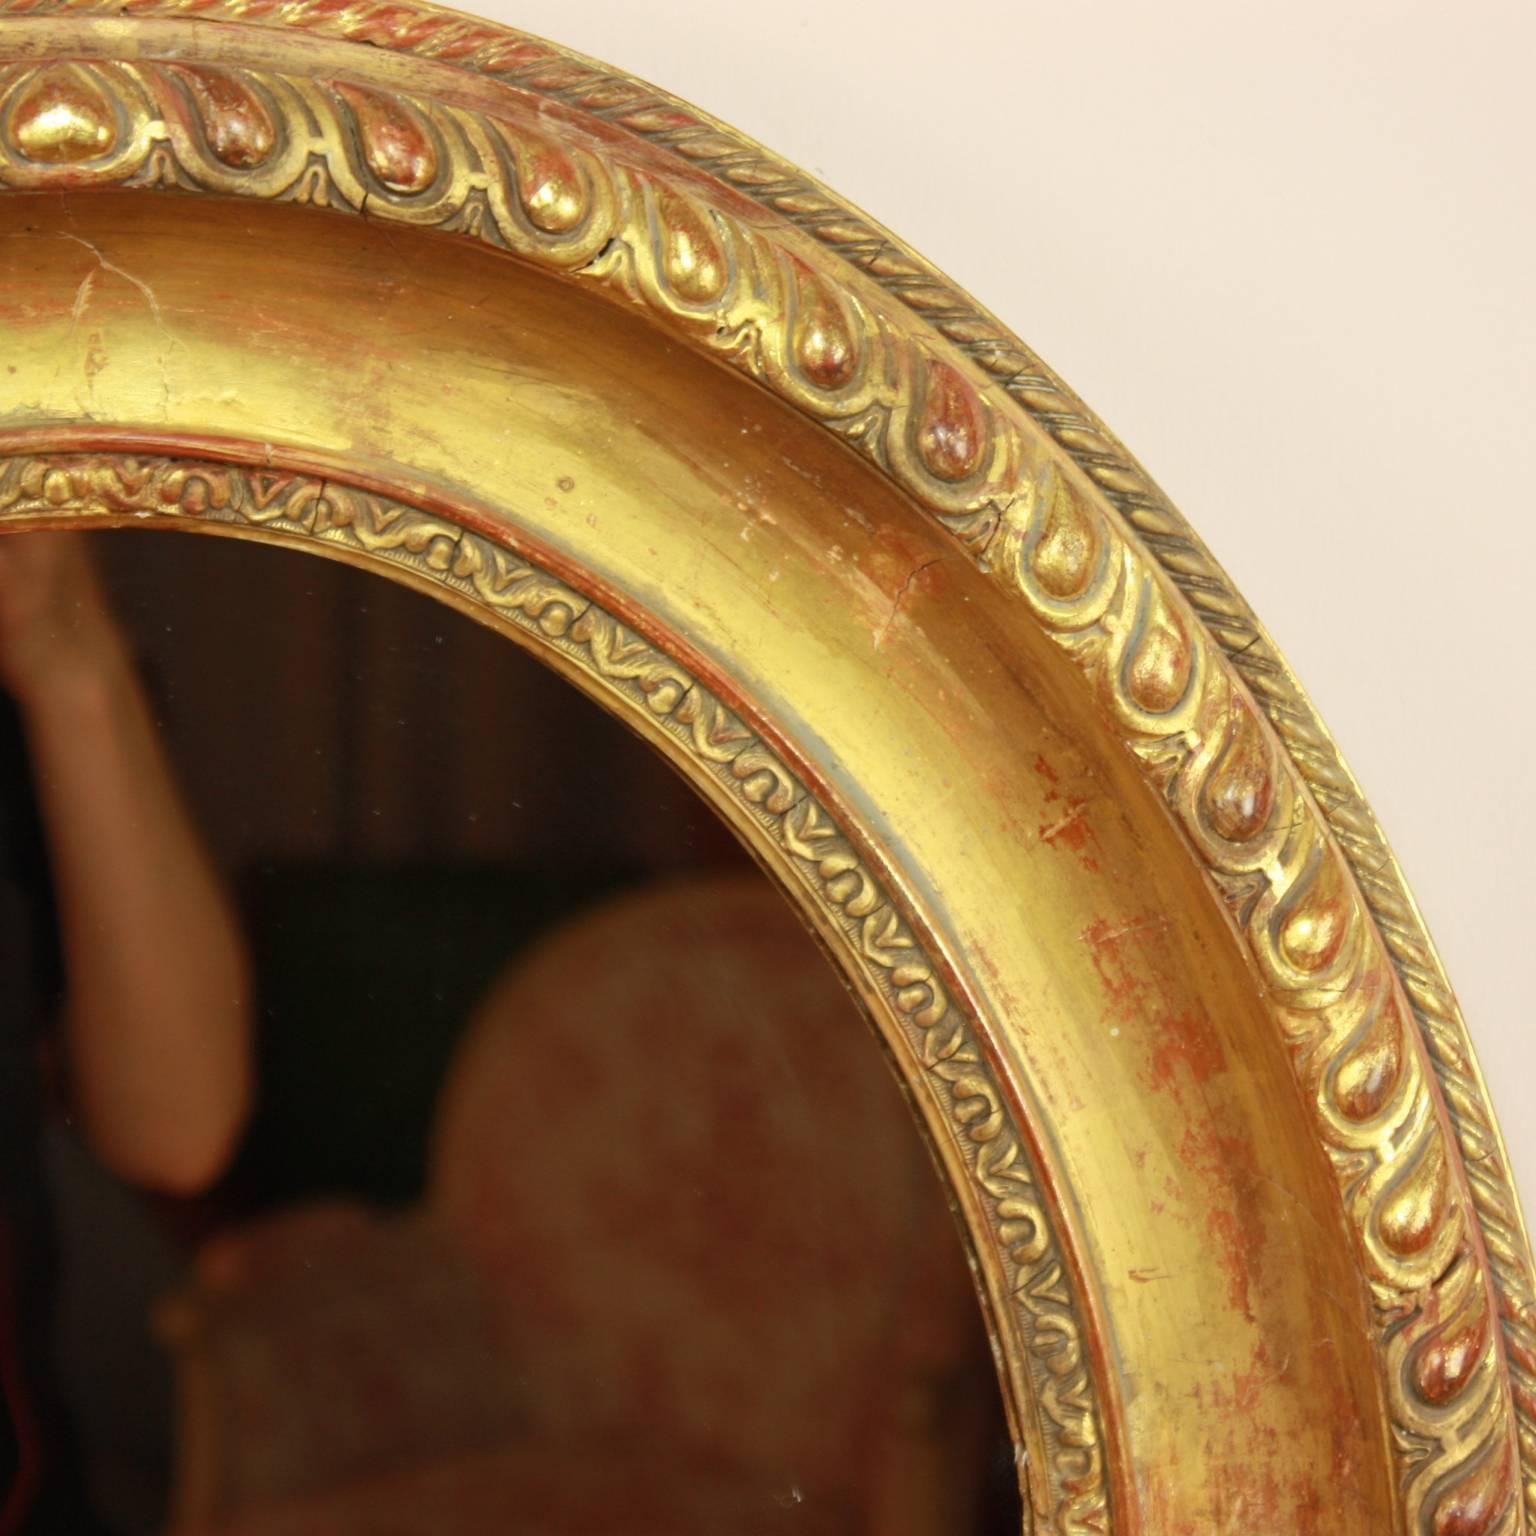 A Louis XVI oval giltwood wall mirror featuring a finely carved band of gadrooning of convex shape. The paisley-like motif is followed by a concave band and a more detailed foliate band. Water gilding of polished and matte quality with some bleeding